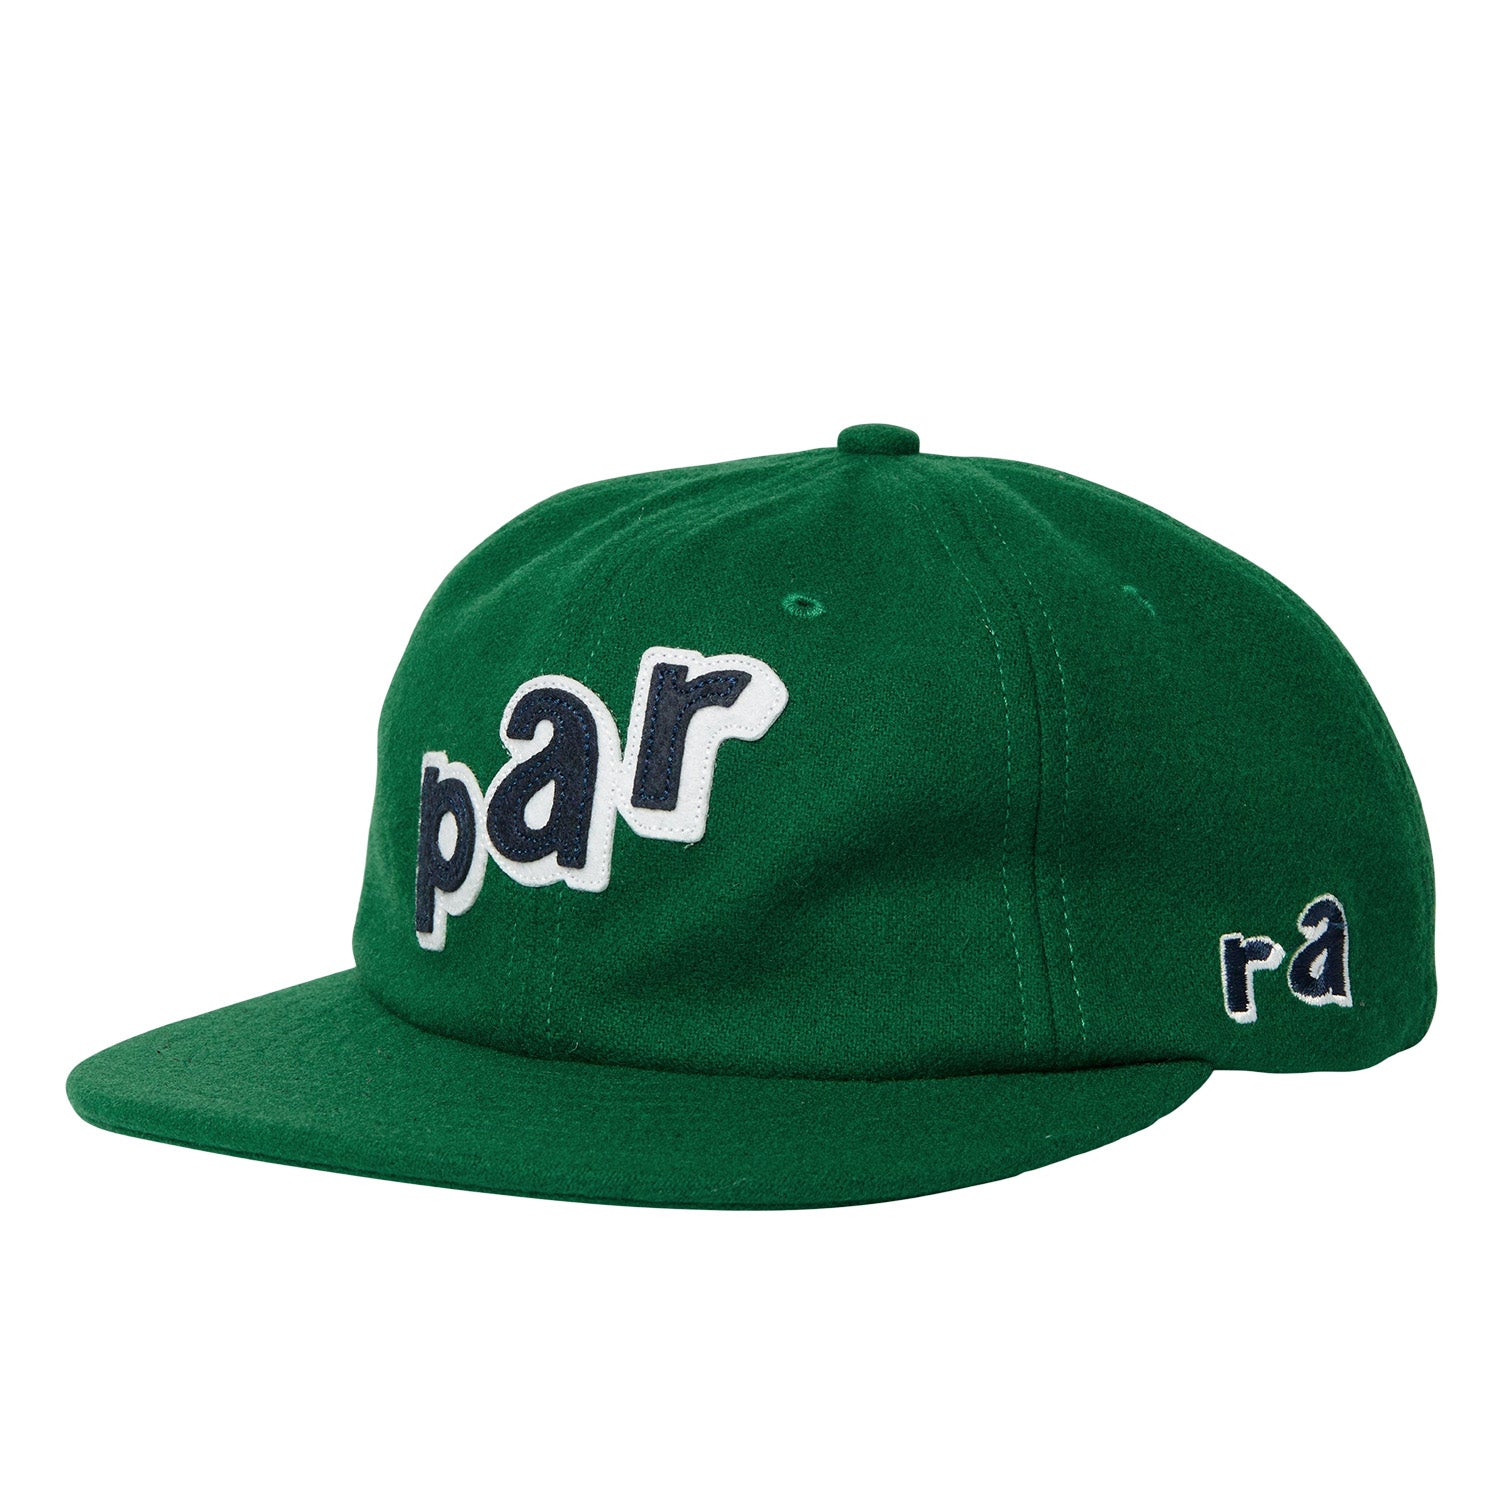 Parra loudness 6 panel hat 'Green'